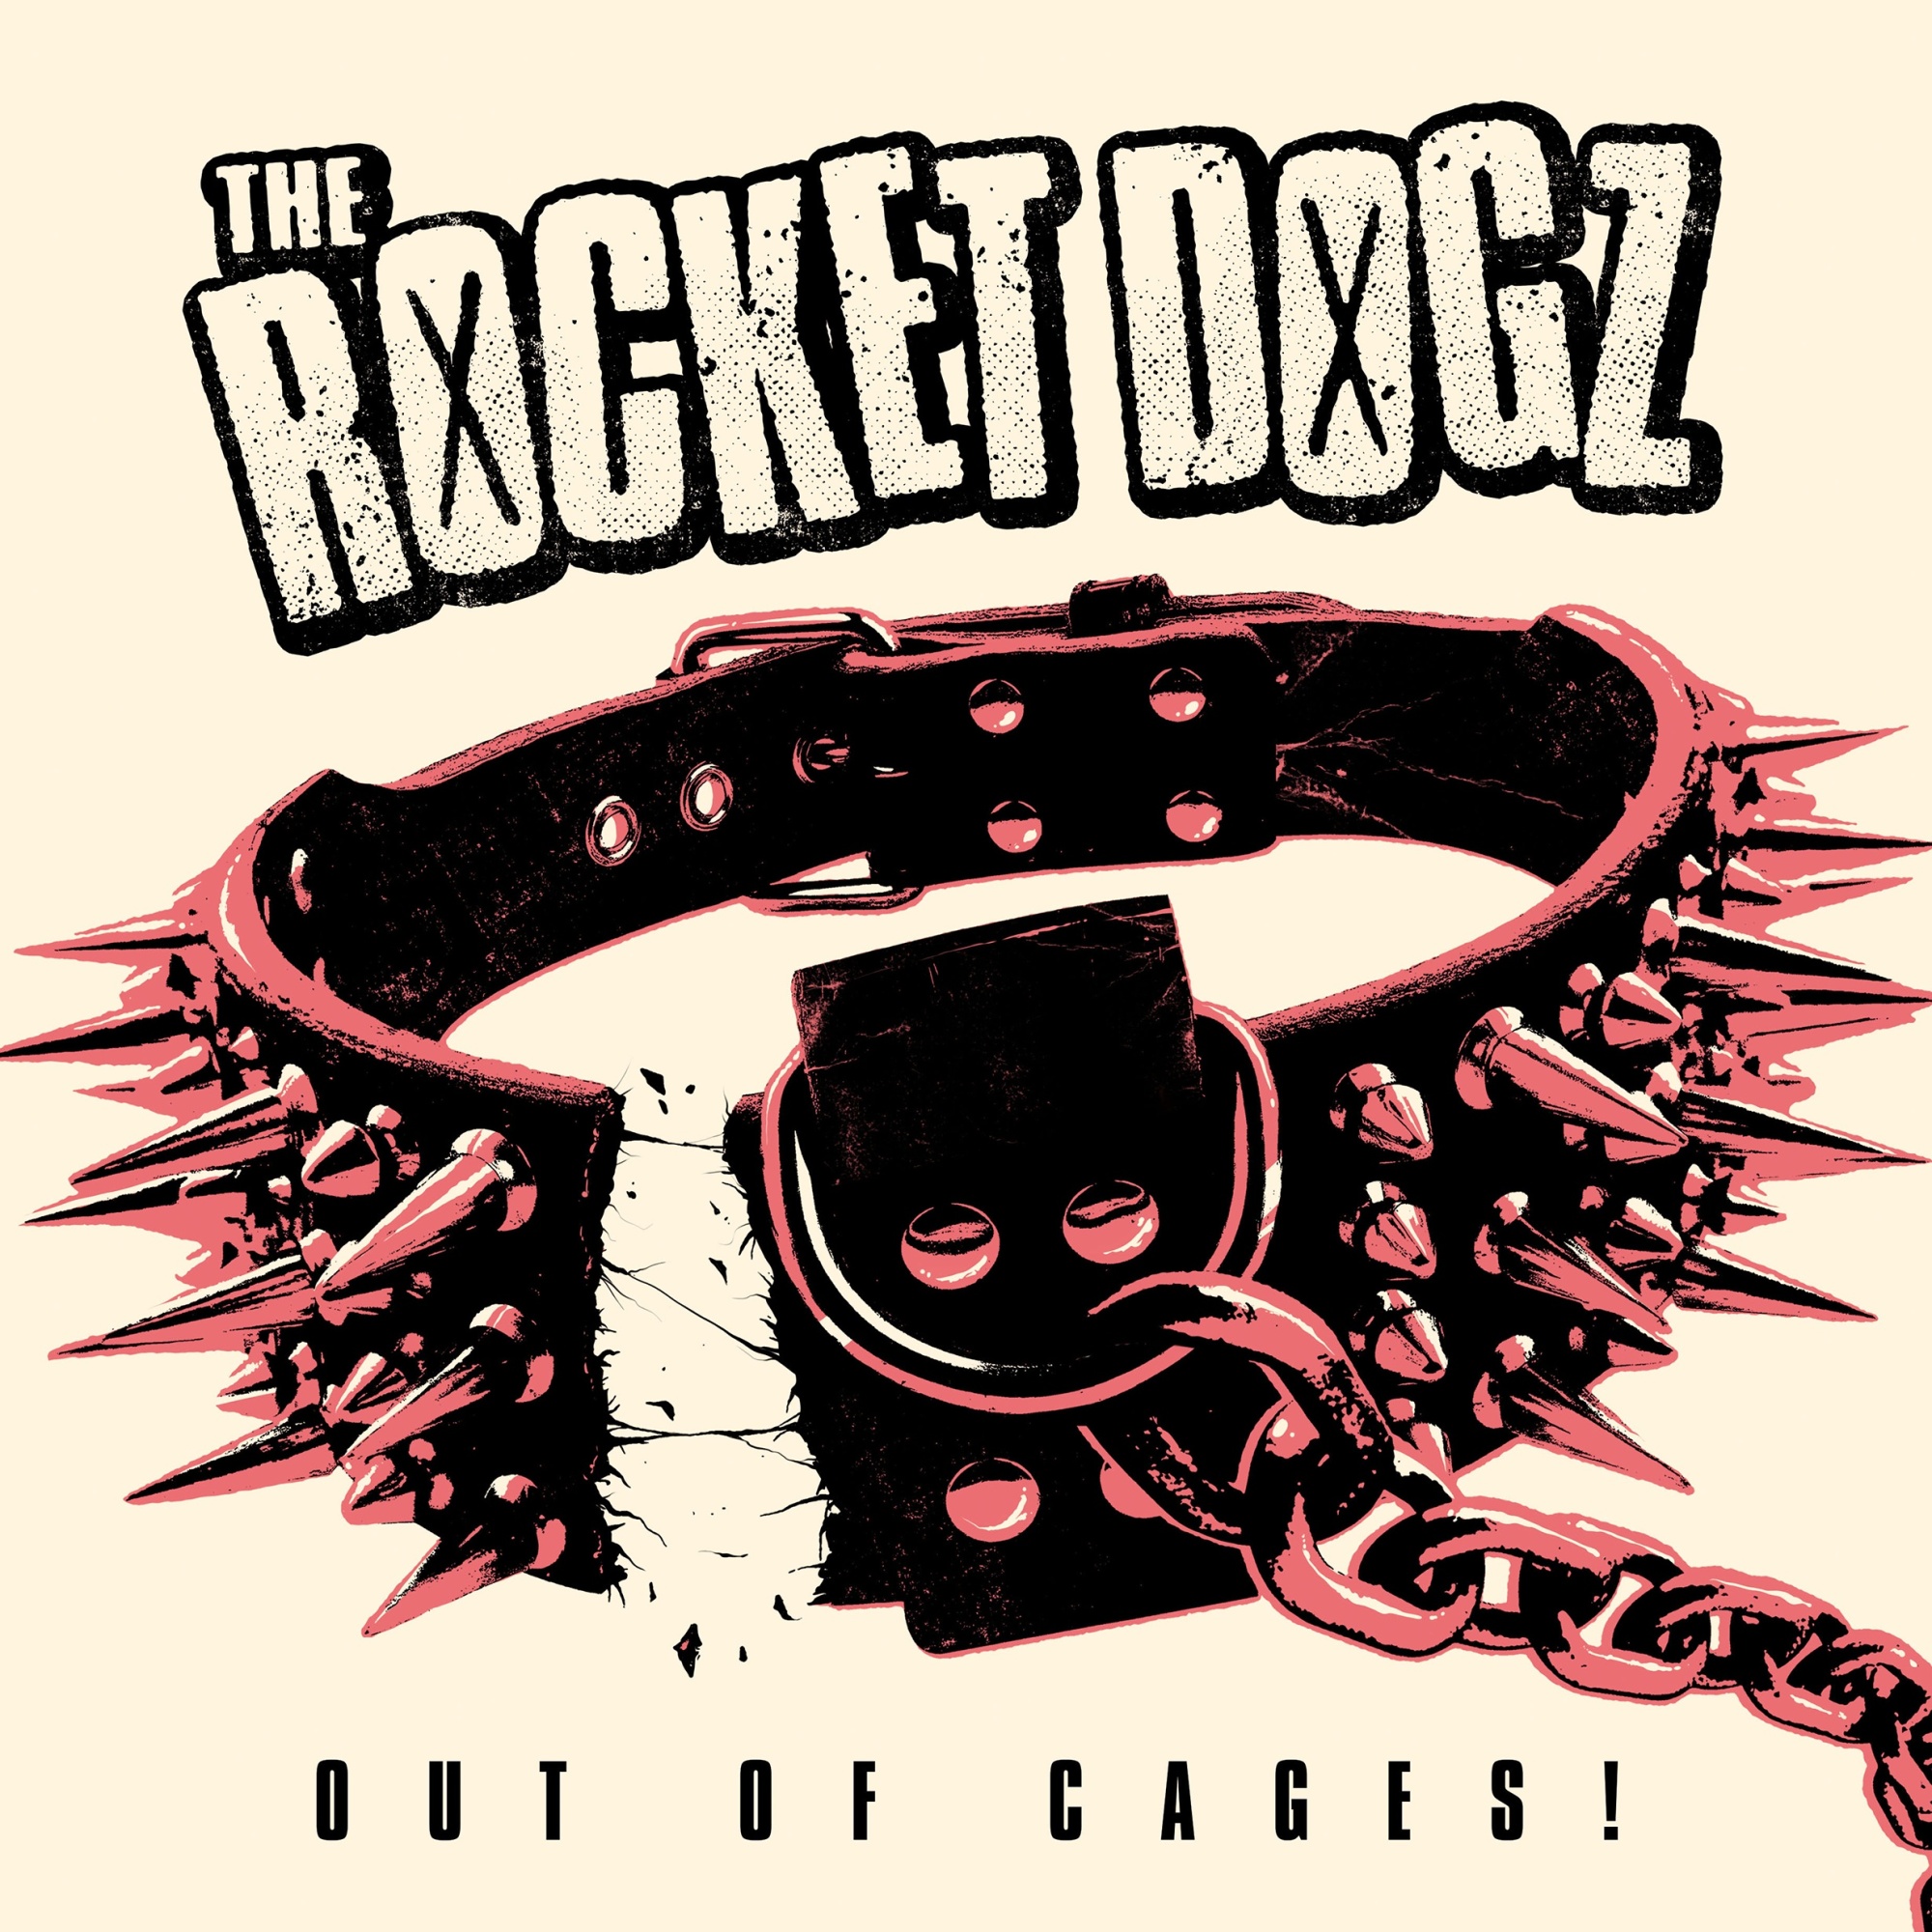 The Rocket Dogz – Out of Cages!